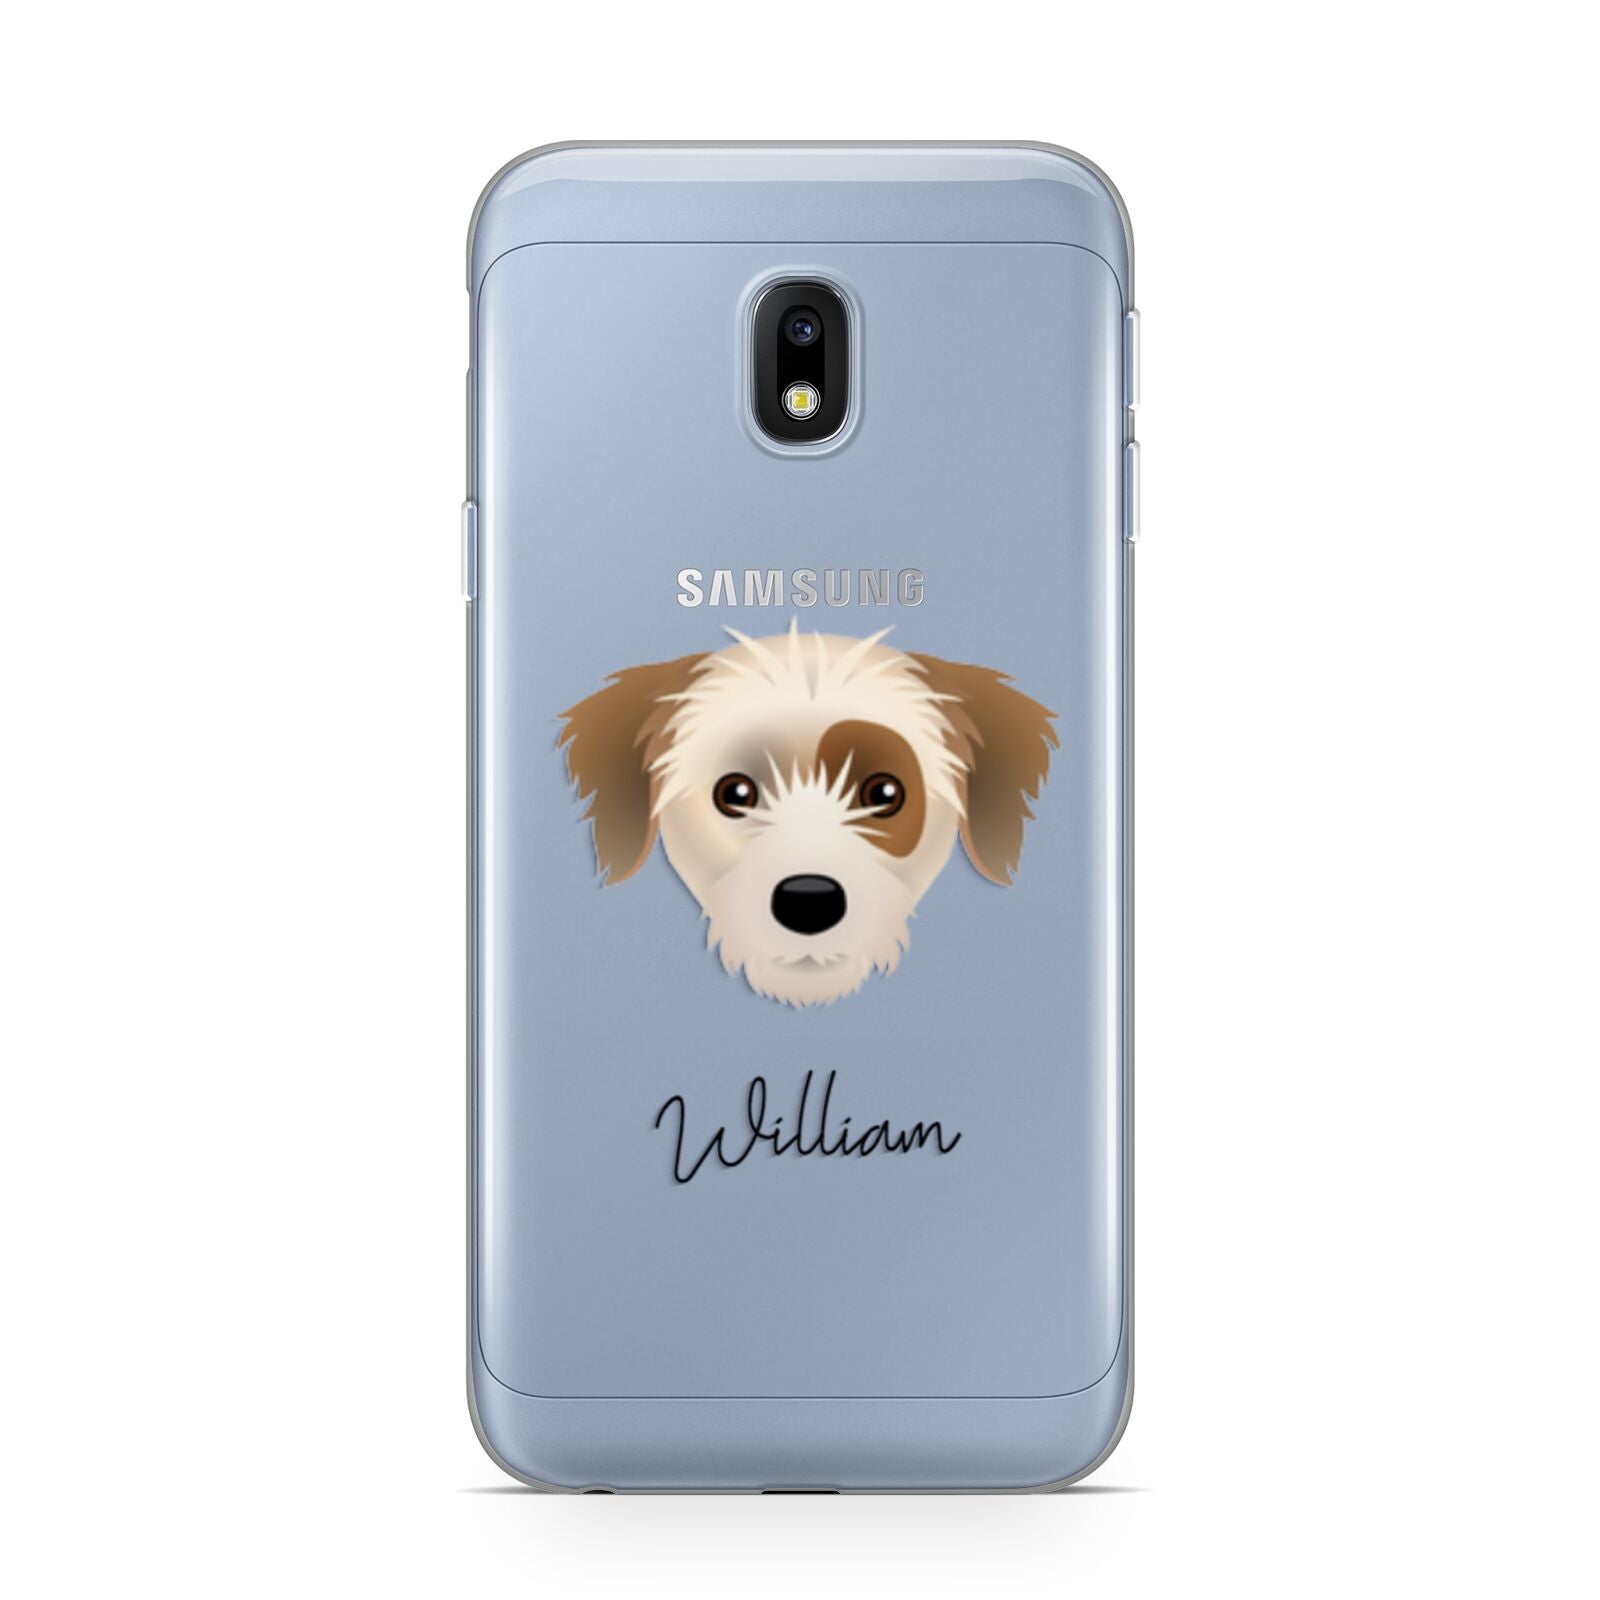 Yorkie Russell Personalised Samsung Galaxy J3 2017 Case